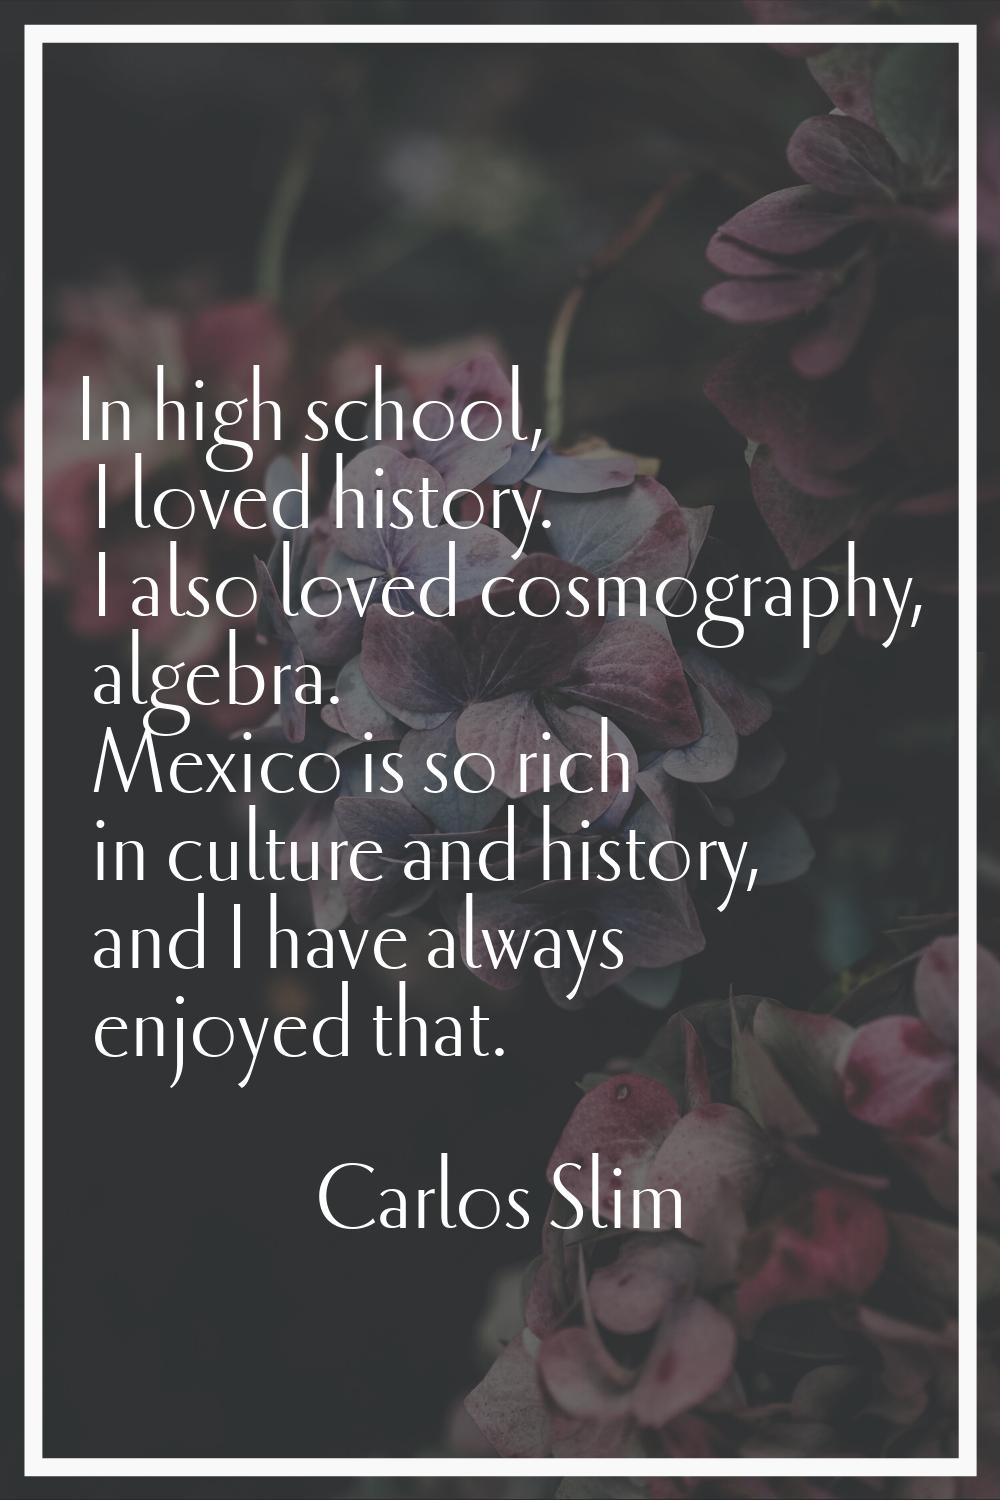 In high school, I loved history. I also loved cosmography, algebra. Mexico is so rich in culture an